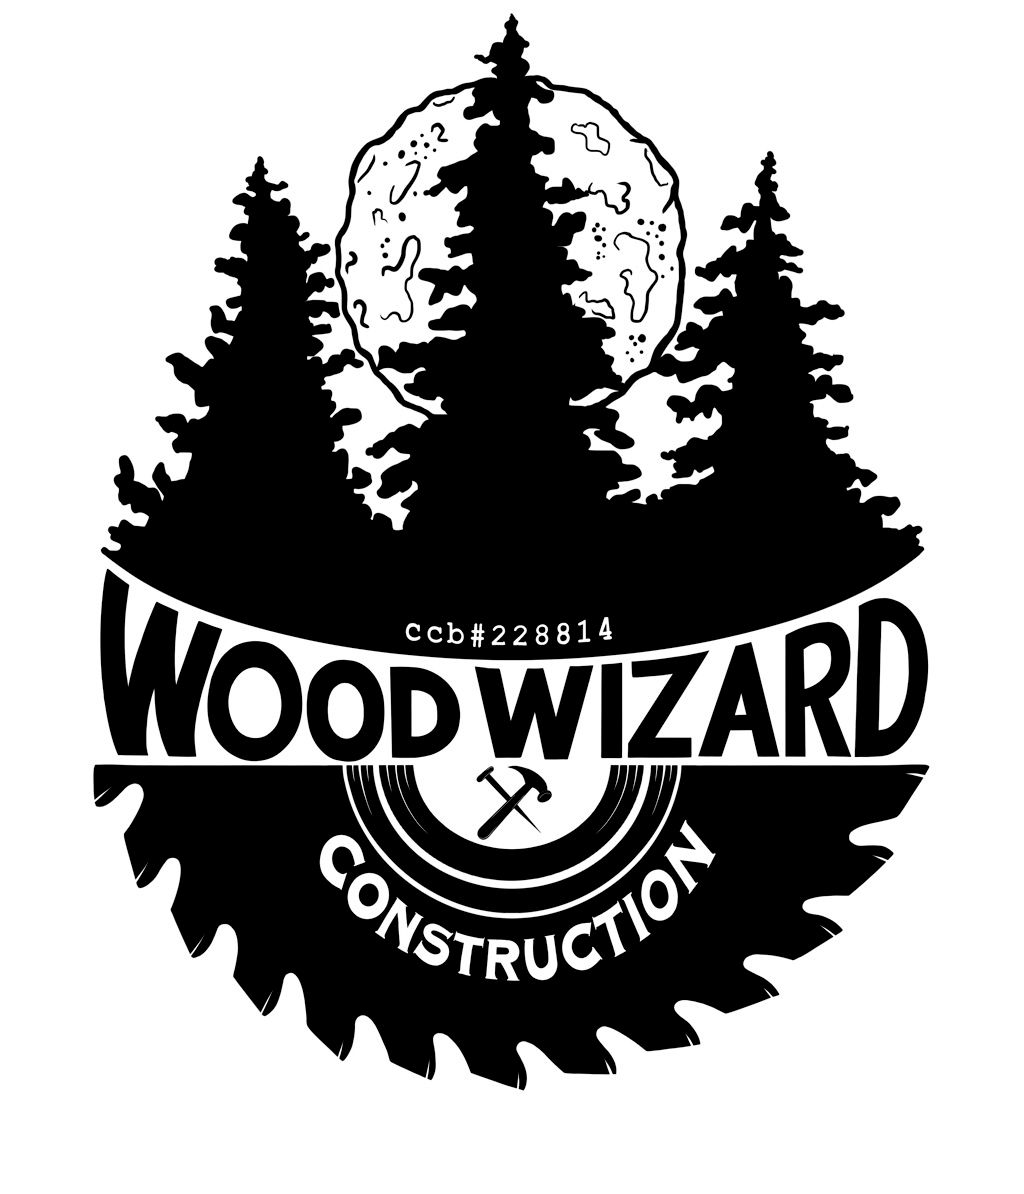 Wood wizard construction